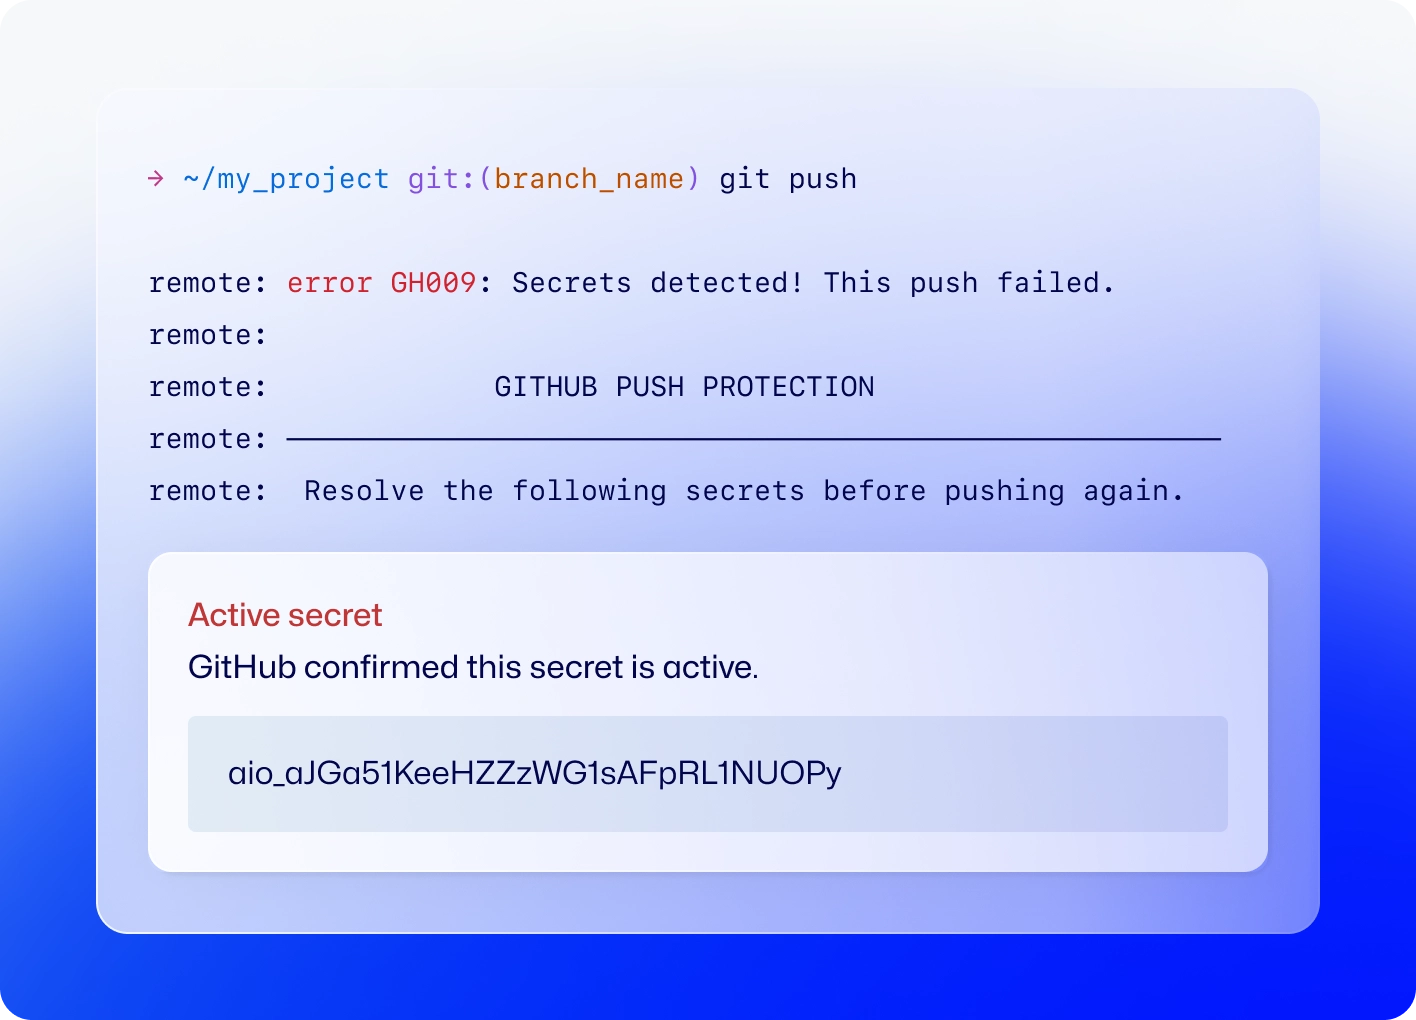 Command line "git push" with response "Secrets detected! This push failed" displaying the active secret